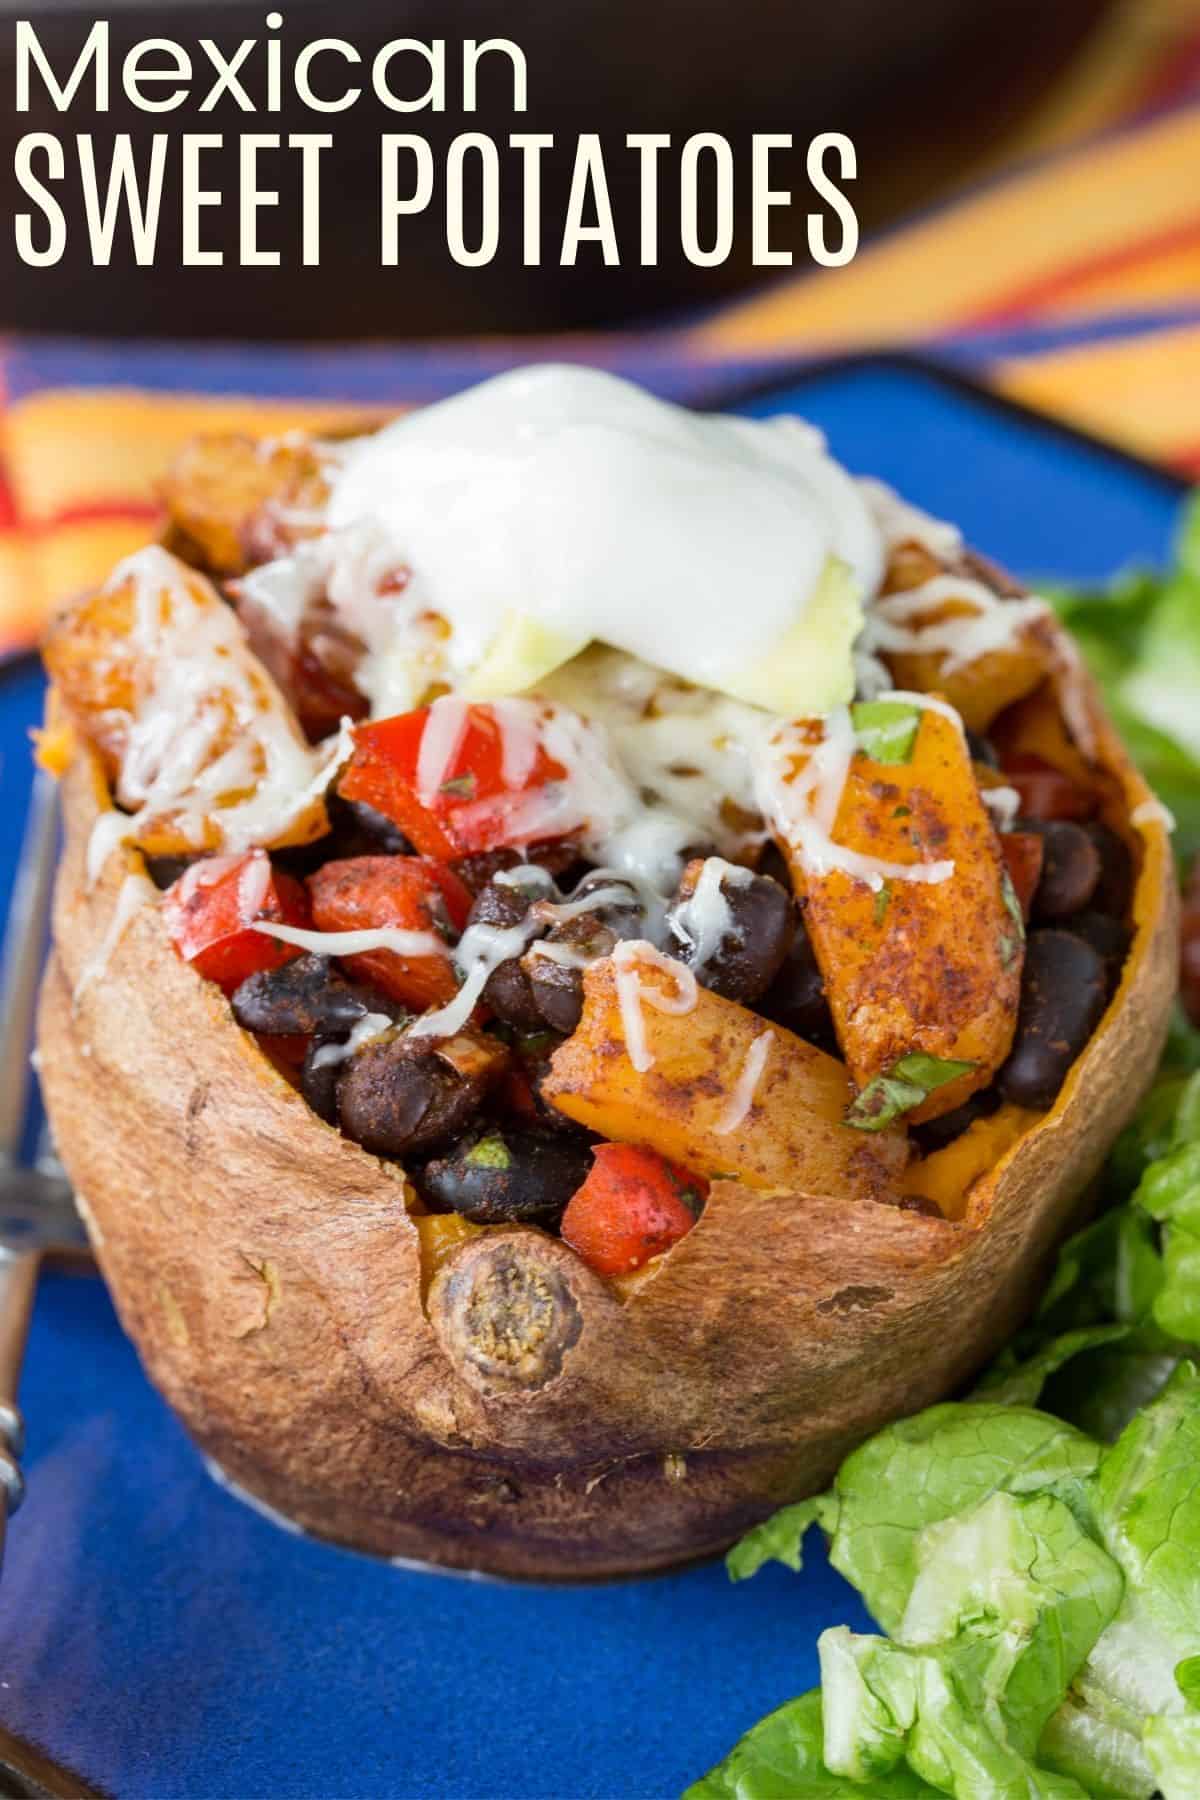 Mexican Pineapple Black Bean Stuffed Baked Sweet Potatoes - a healthy, meatless, gluten-free dinner, perfect for Cinco de Mayo! {vegan option}